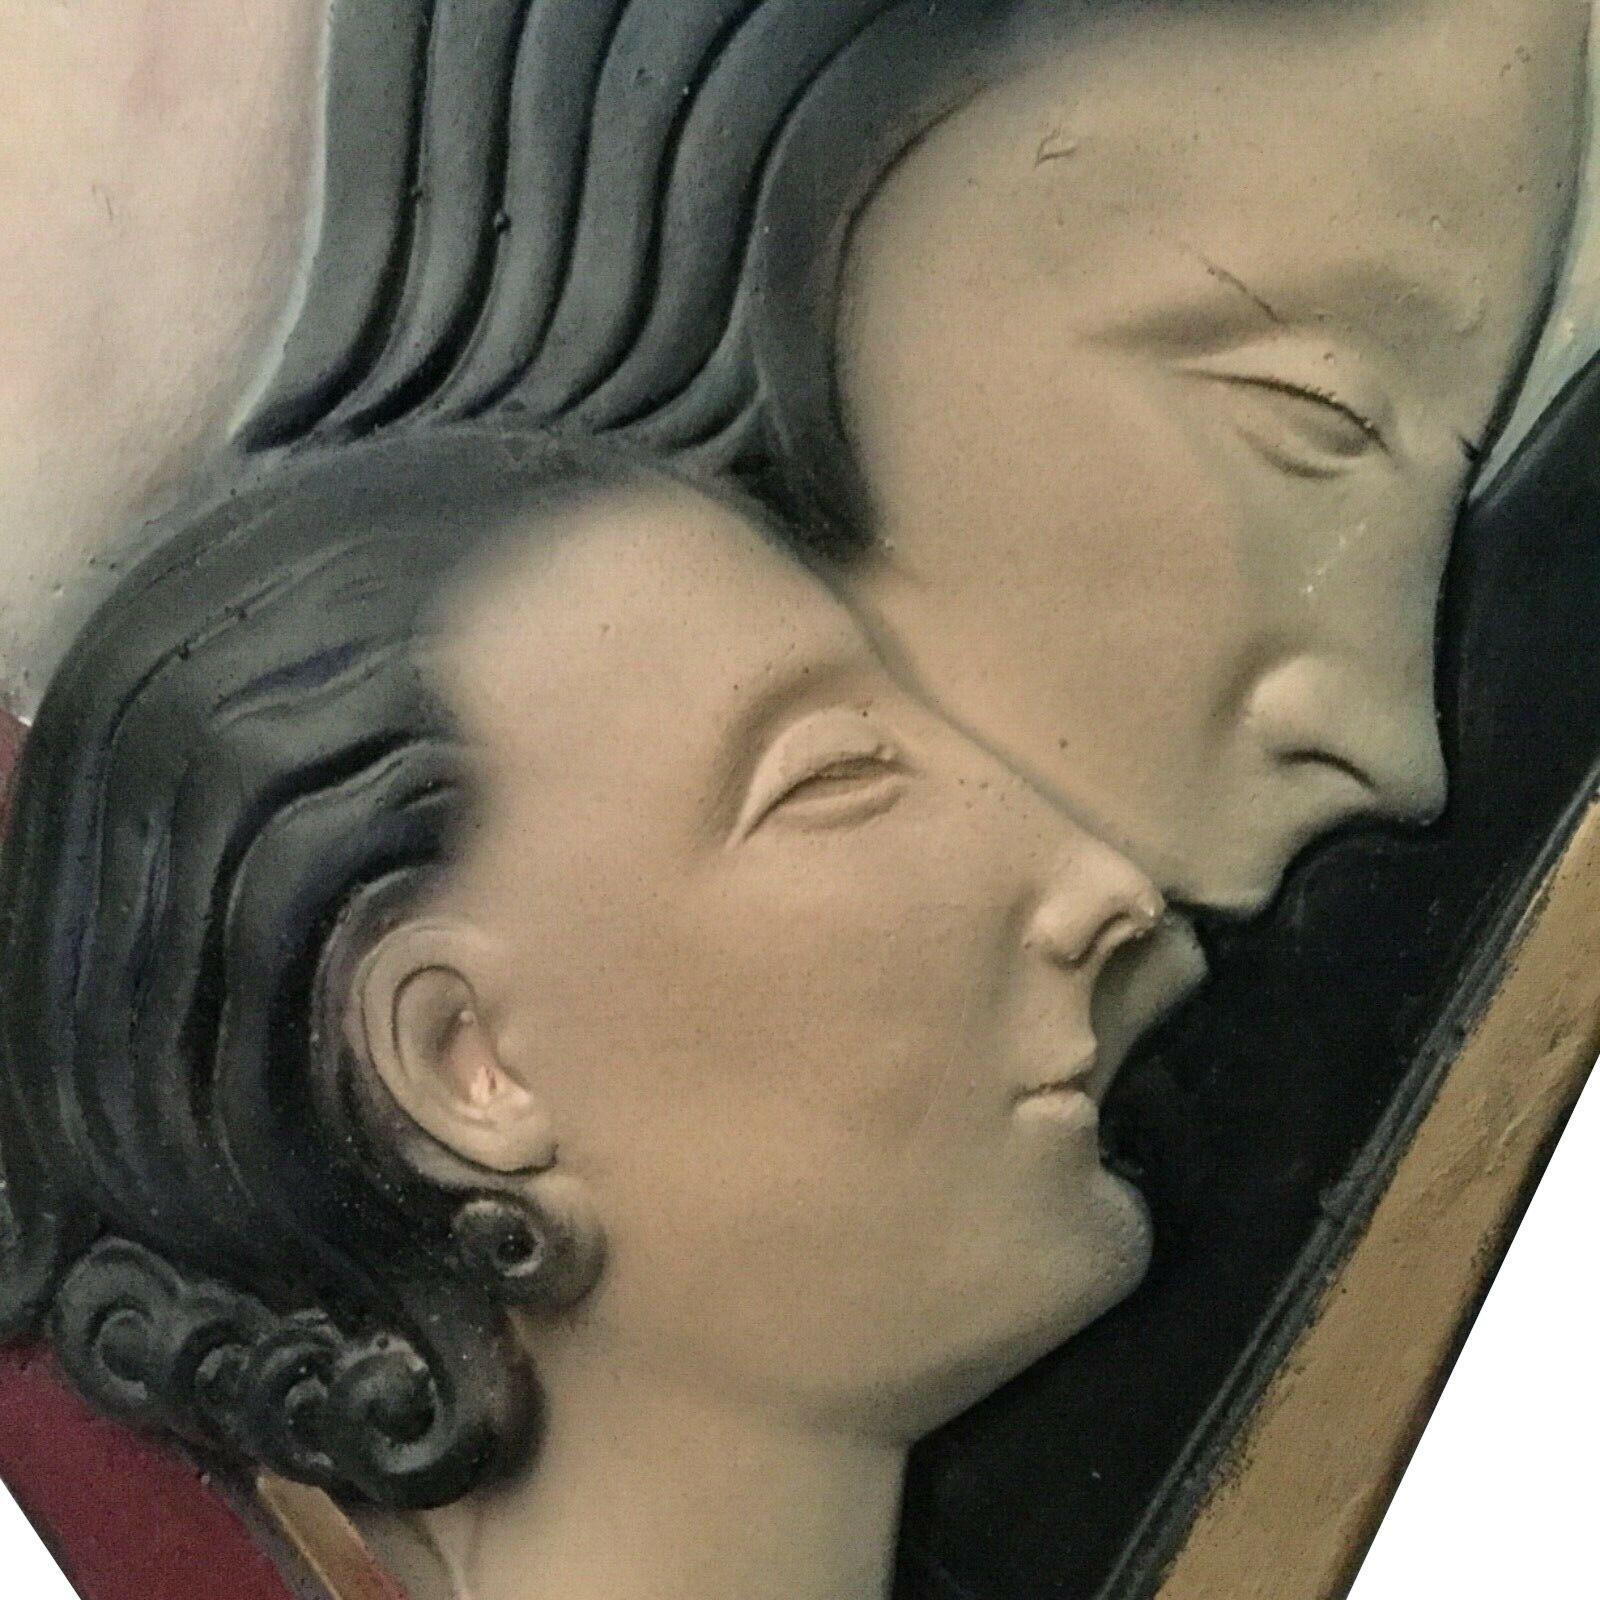 For your consideration is very rare and totally authentic Art Deco period freestanding advertising plaque. Originating from France this advertising stand was for a company called 'Callia' which was for hair straightening/ waving products. Features